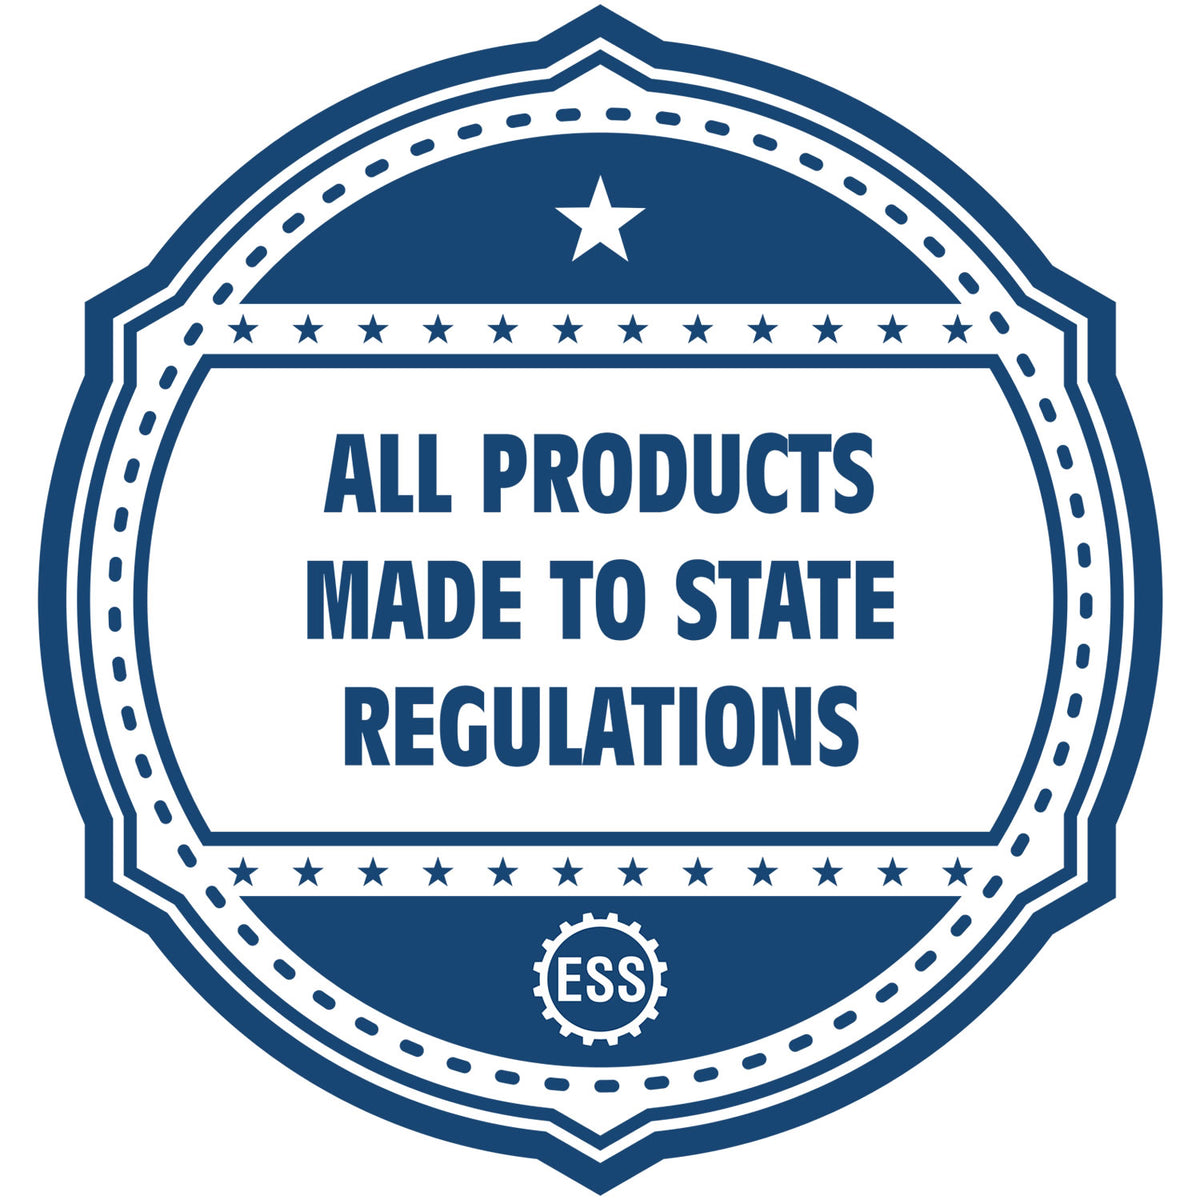 An icon or badge element for the Slim Pre-Inked Rectangular Notary Stamp for Maryland showing that this product is made in compliance with state regulations.